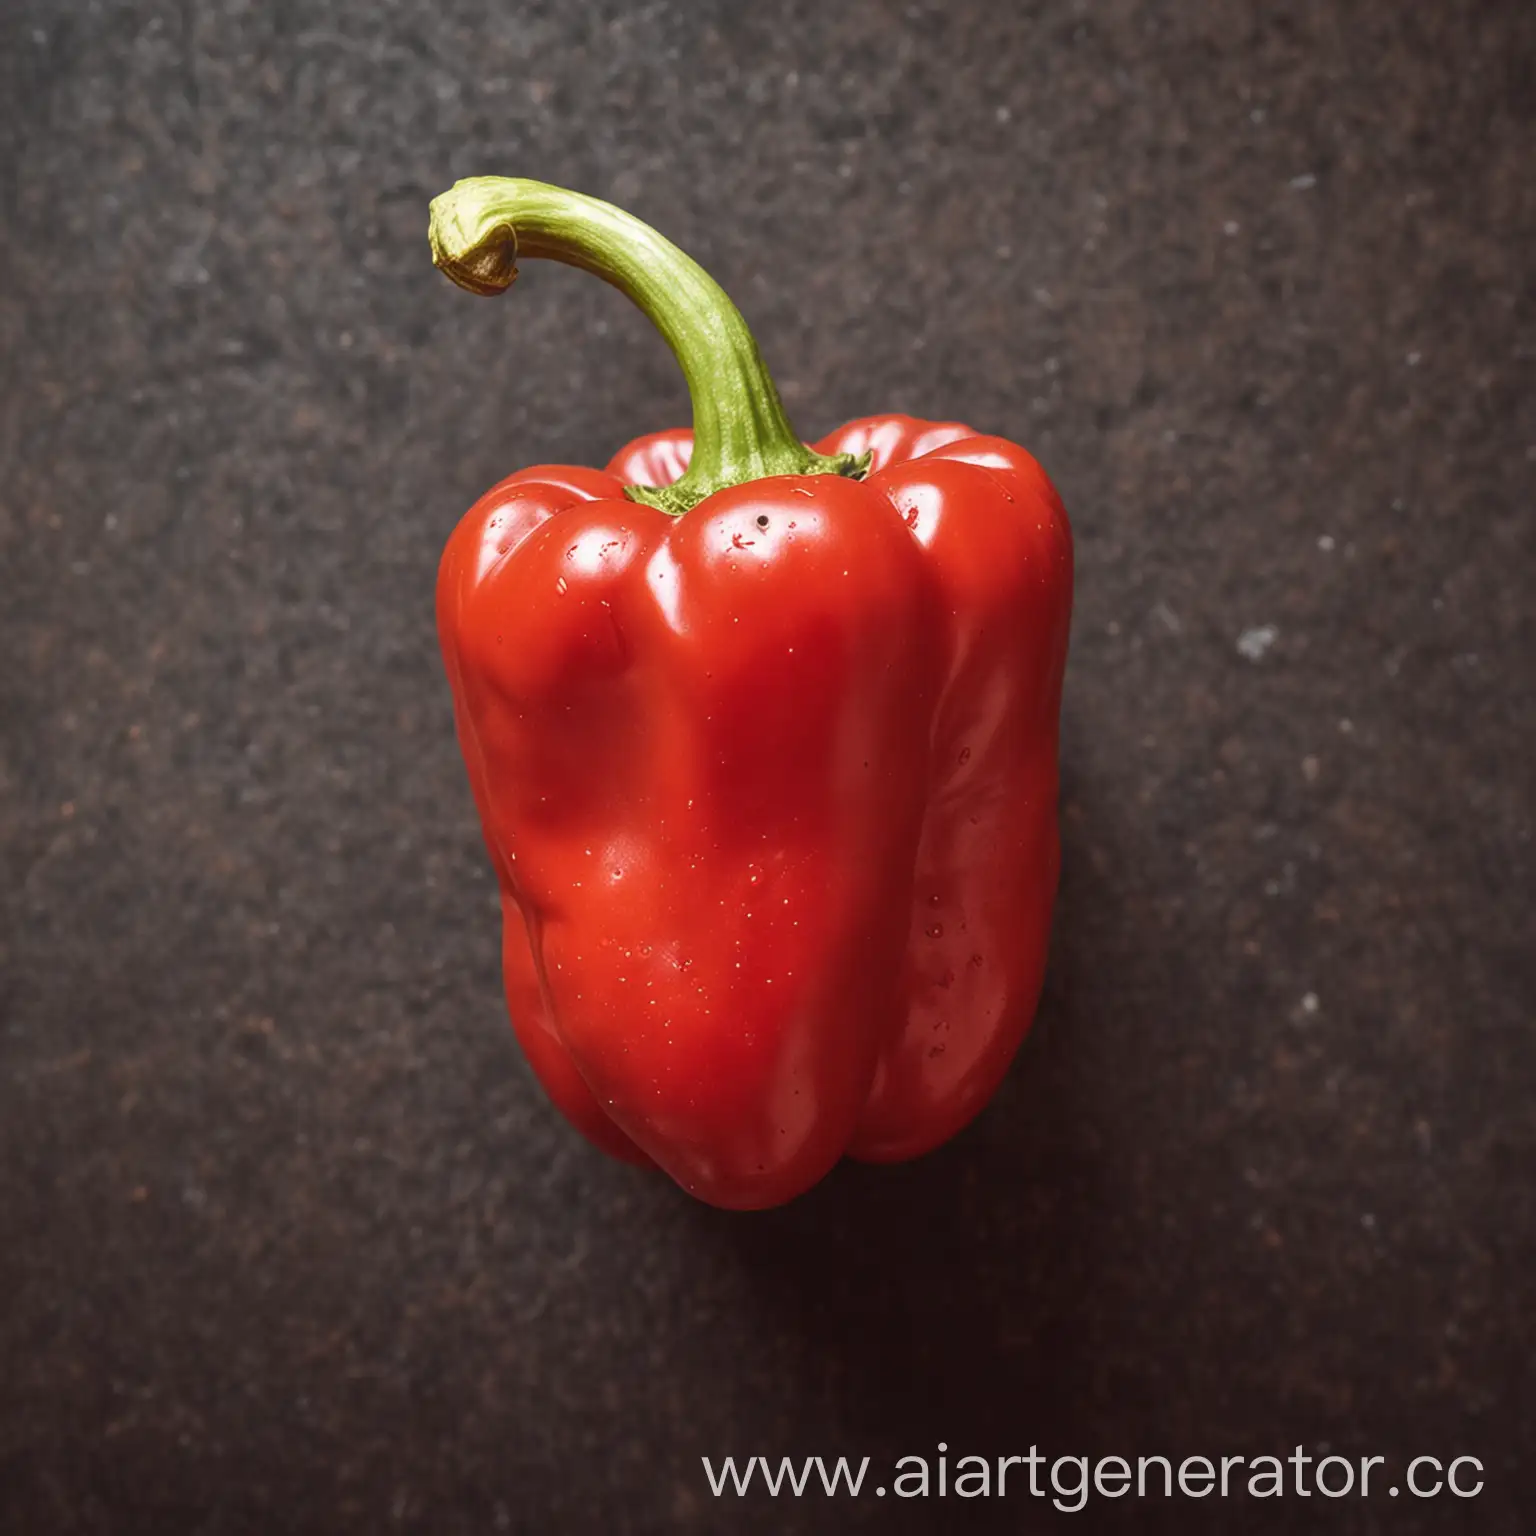 Vibrant-Overripe-Red-Pepper-on-Rustic-Wooden-Surface